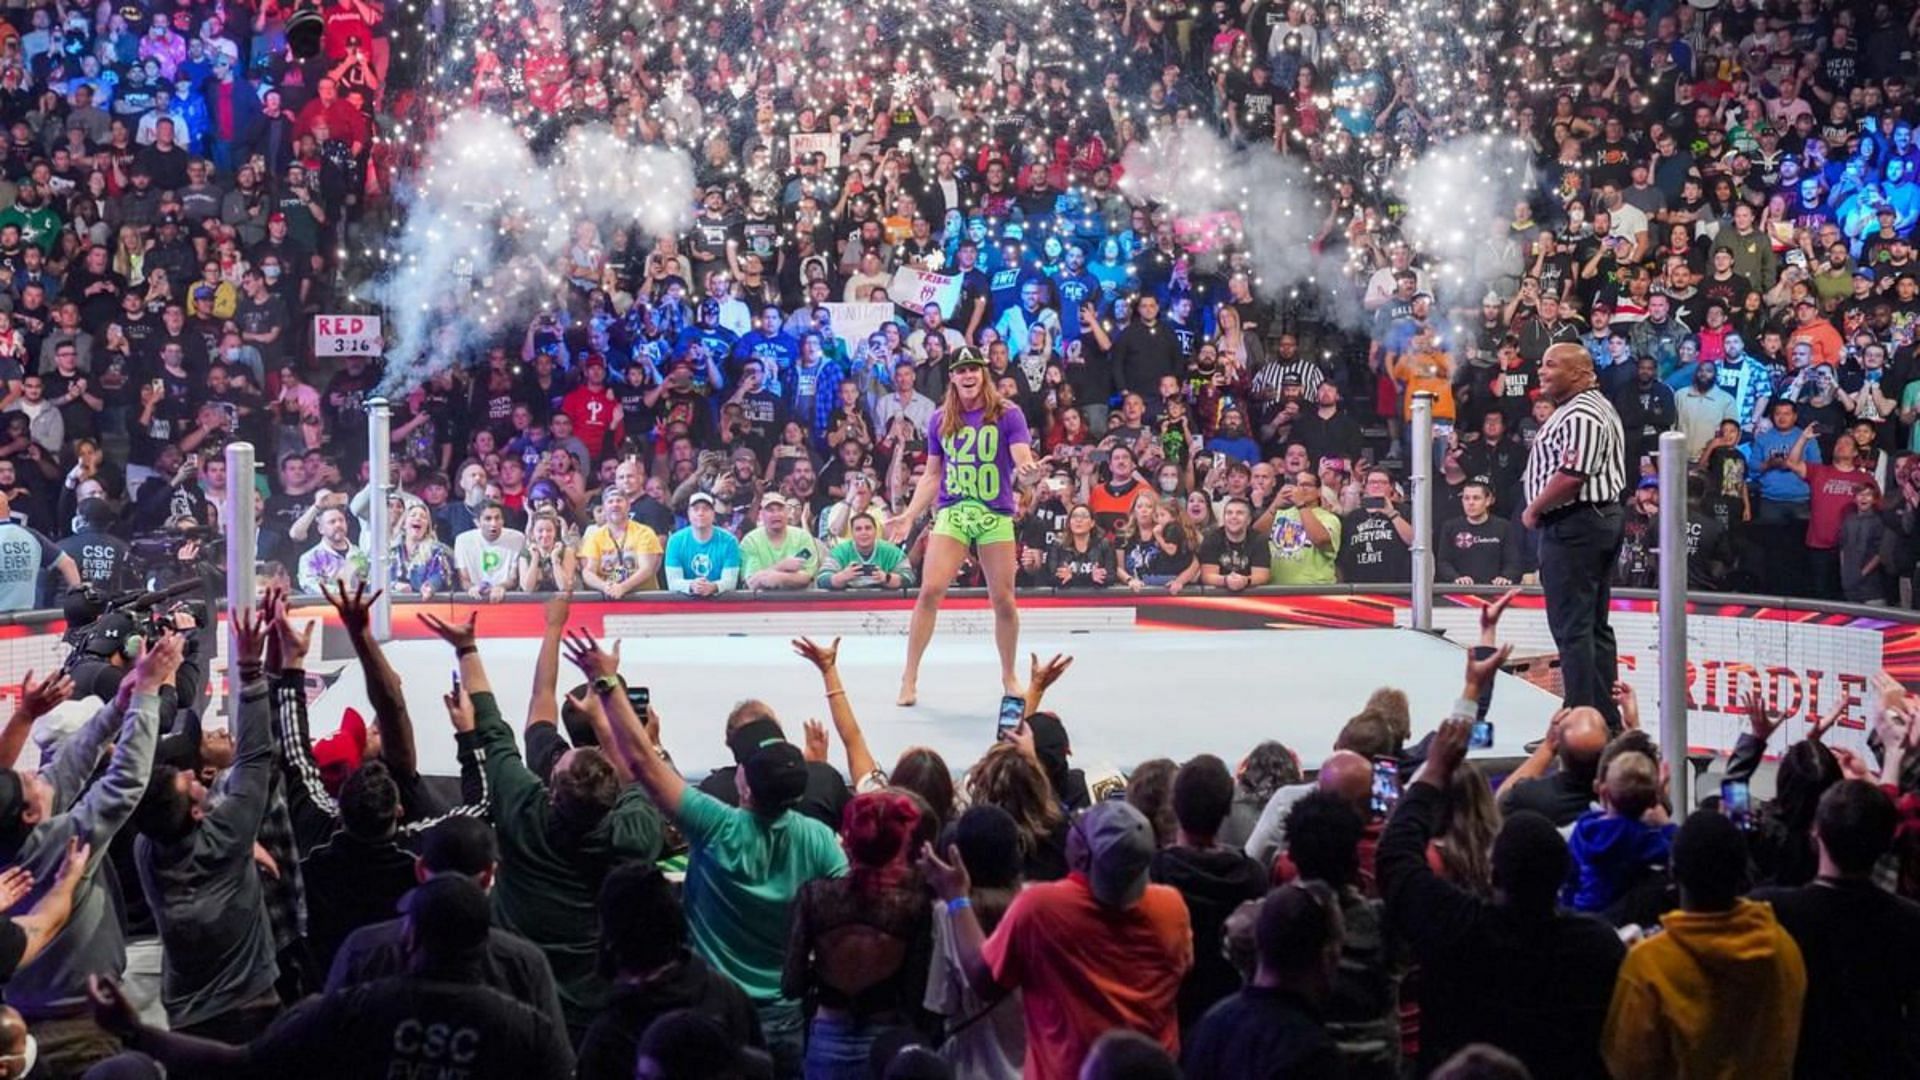 The crowd&#039;s reaction to Matt Riddle&#039;s entrance at Extreme Rules (Source: WWE.com)